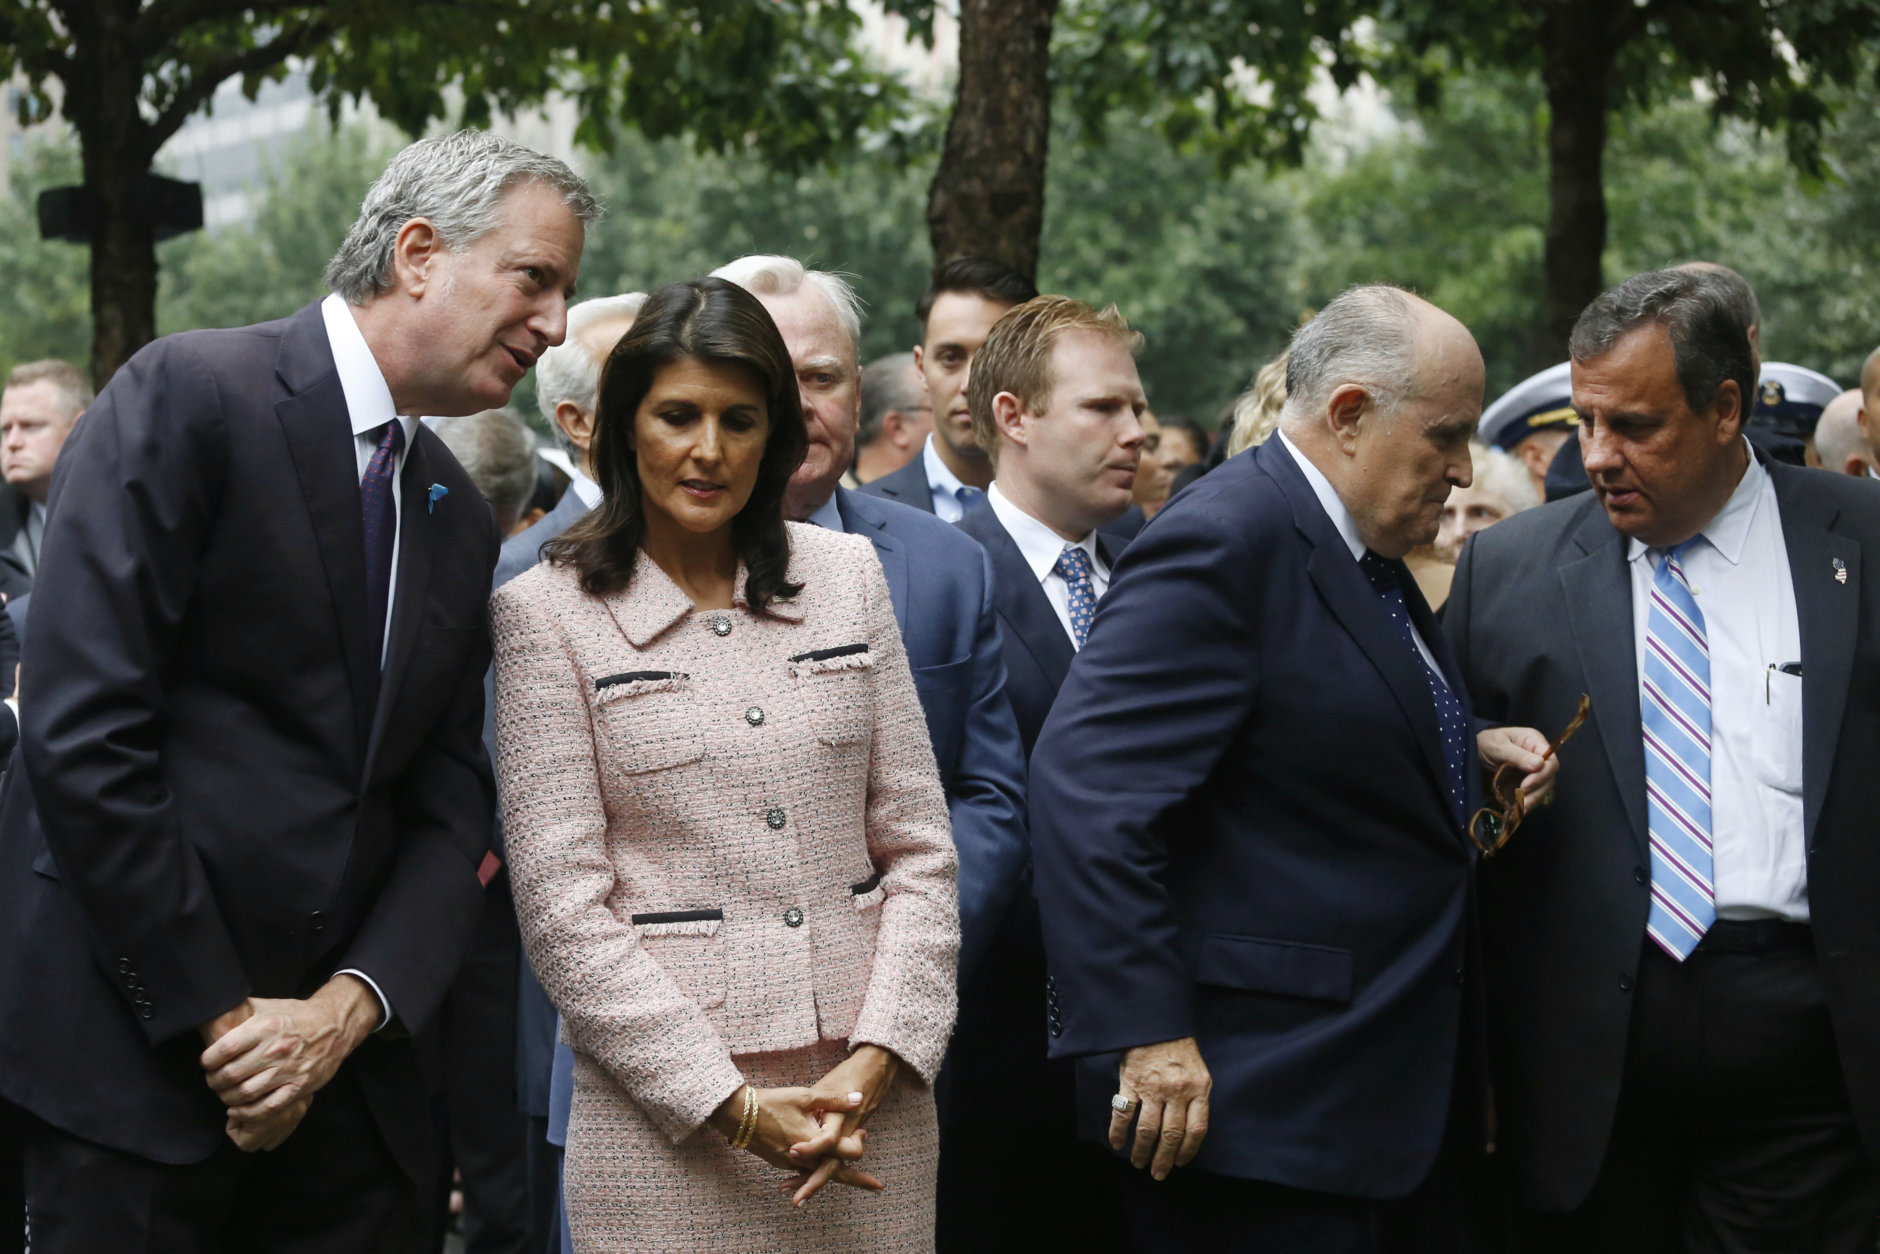 Attending a ceremony marking the 17th anniversary of the terrorist attacks on the United States are, left to right: New York Mayor Bill de Blasio, Nikki Haley, the U.S. Ambassador to the United Nations, Rudy Giuliani, lawyer for President Donald Trump and former mayor of New York, and Chris Christie, former governor of New Jersey, Tuesday, Sept. 11, 2018, in New York. (AP Photo/Mark Lennihan)